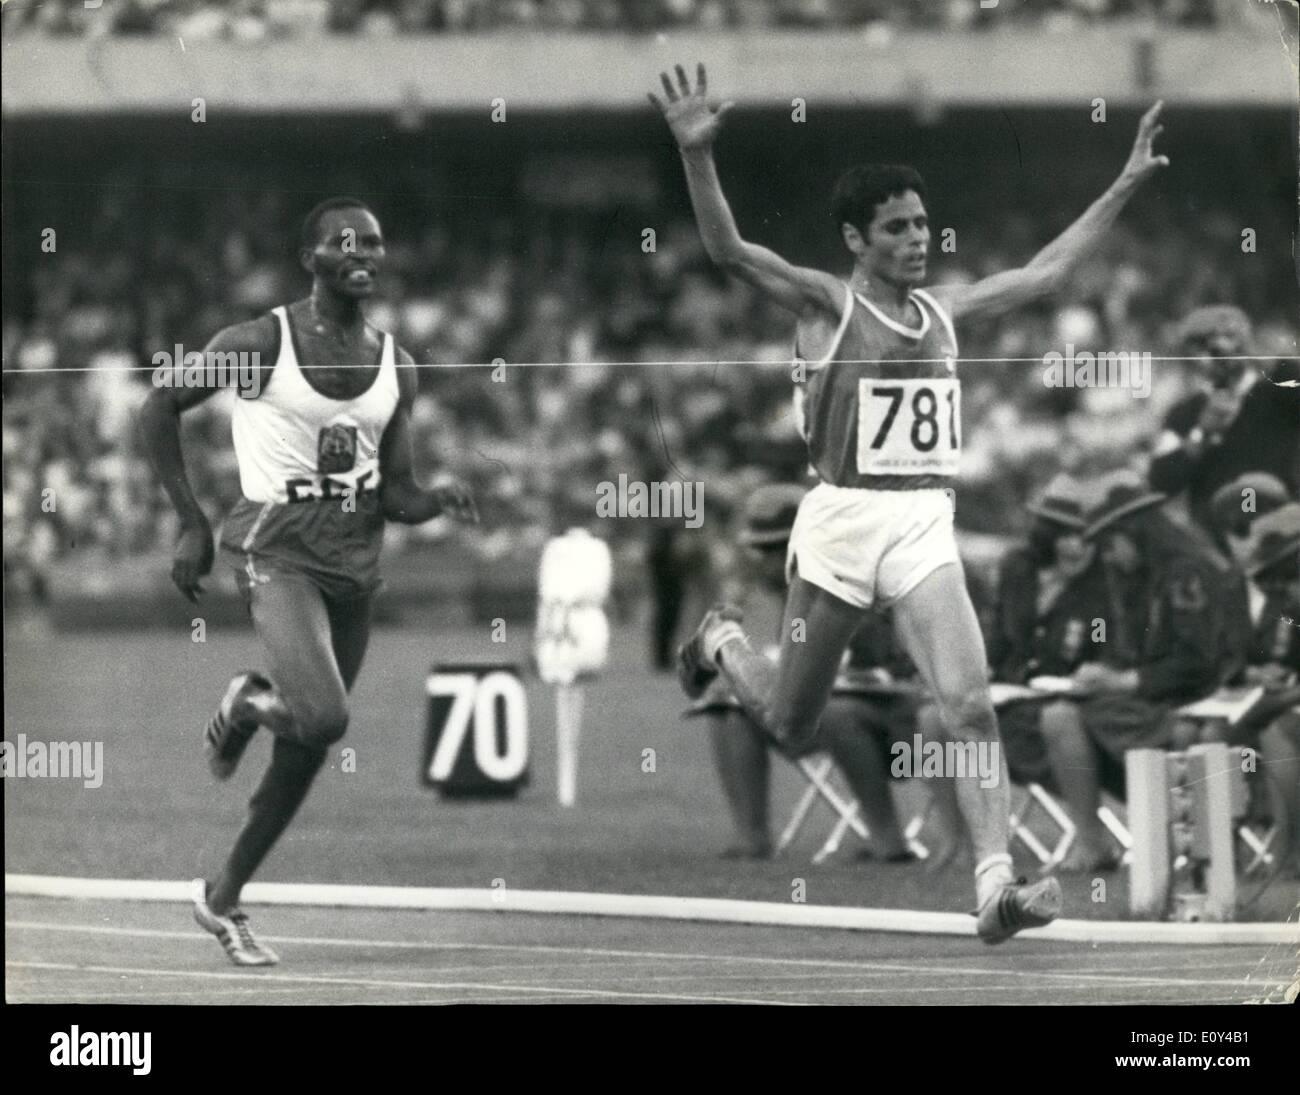 Oct. 10, 1968 - Mexico Olympics-Gammoudi of Tunisia wins the Gold in the Final of the 5,000 meters. Photo shows M. Gammoudi of Tunisia with his arms in the air crosses the line to win the final of the 5,000 meters in the Mexico Olympics, a close second is H. Keino of Kenya, and third was Temu also of Kenya no in picture. Stock Photo